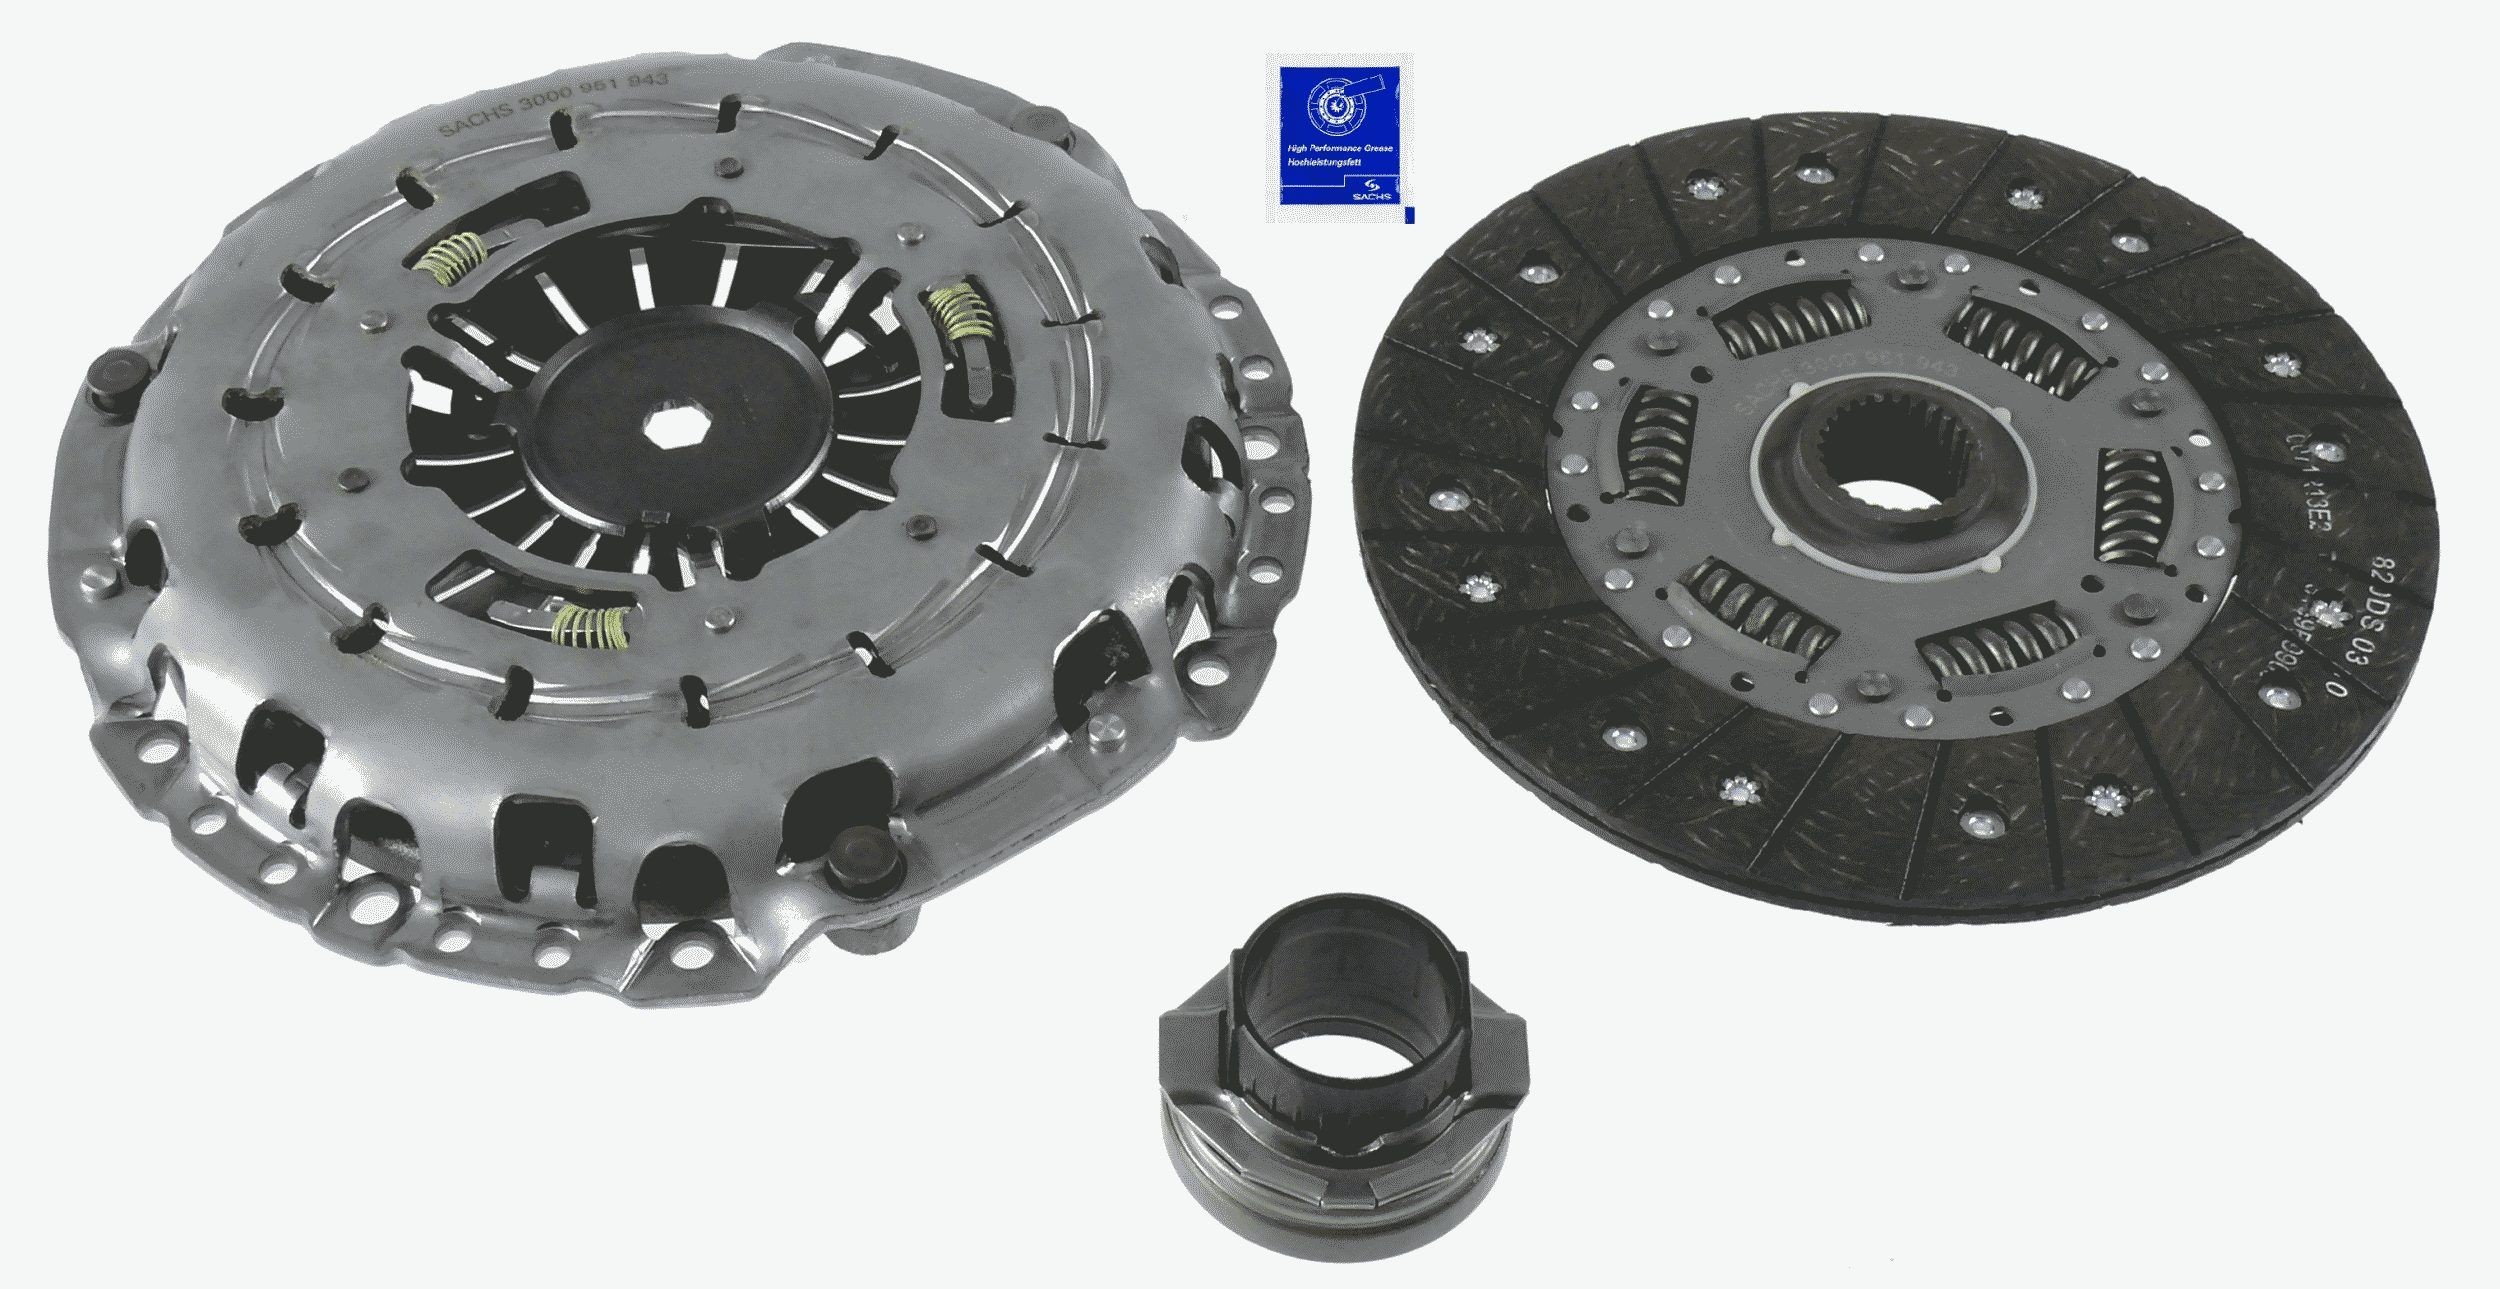 Original SACHS Clutch replacement kit 3000 951 943 for BMW X3